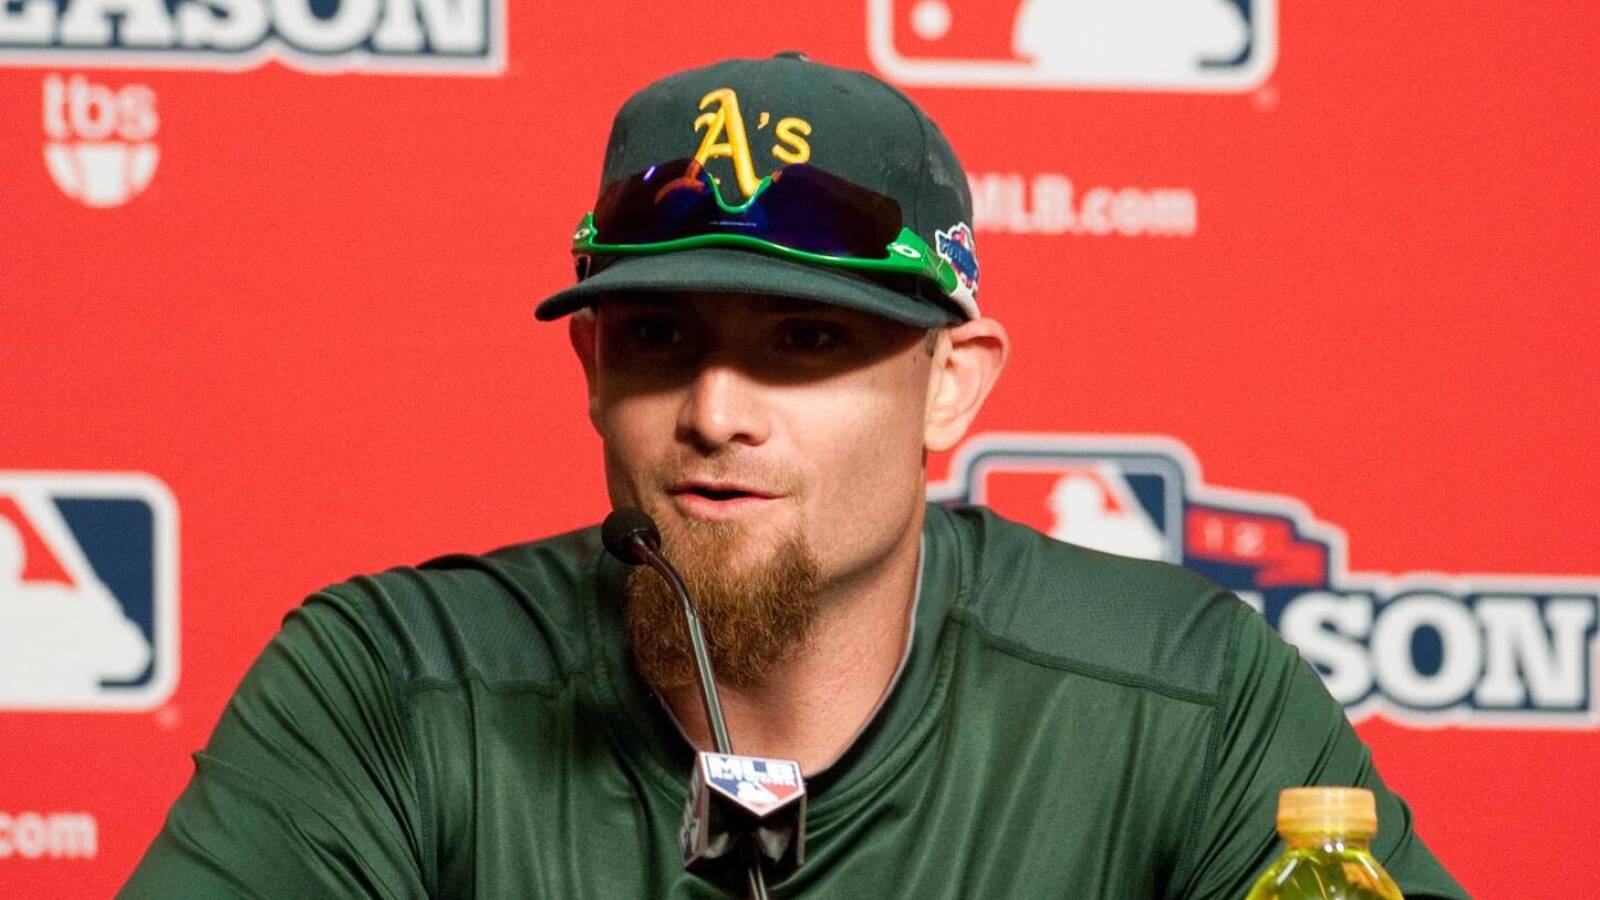 Former A's outfielder says 'door hasn't closed' on team staying in Oakland